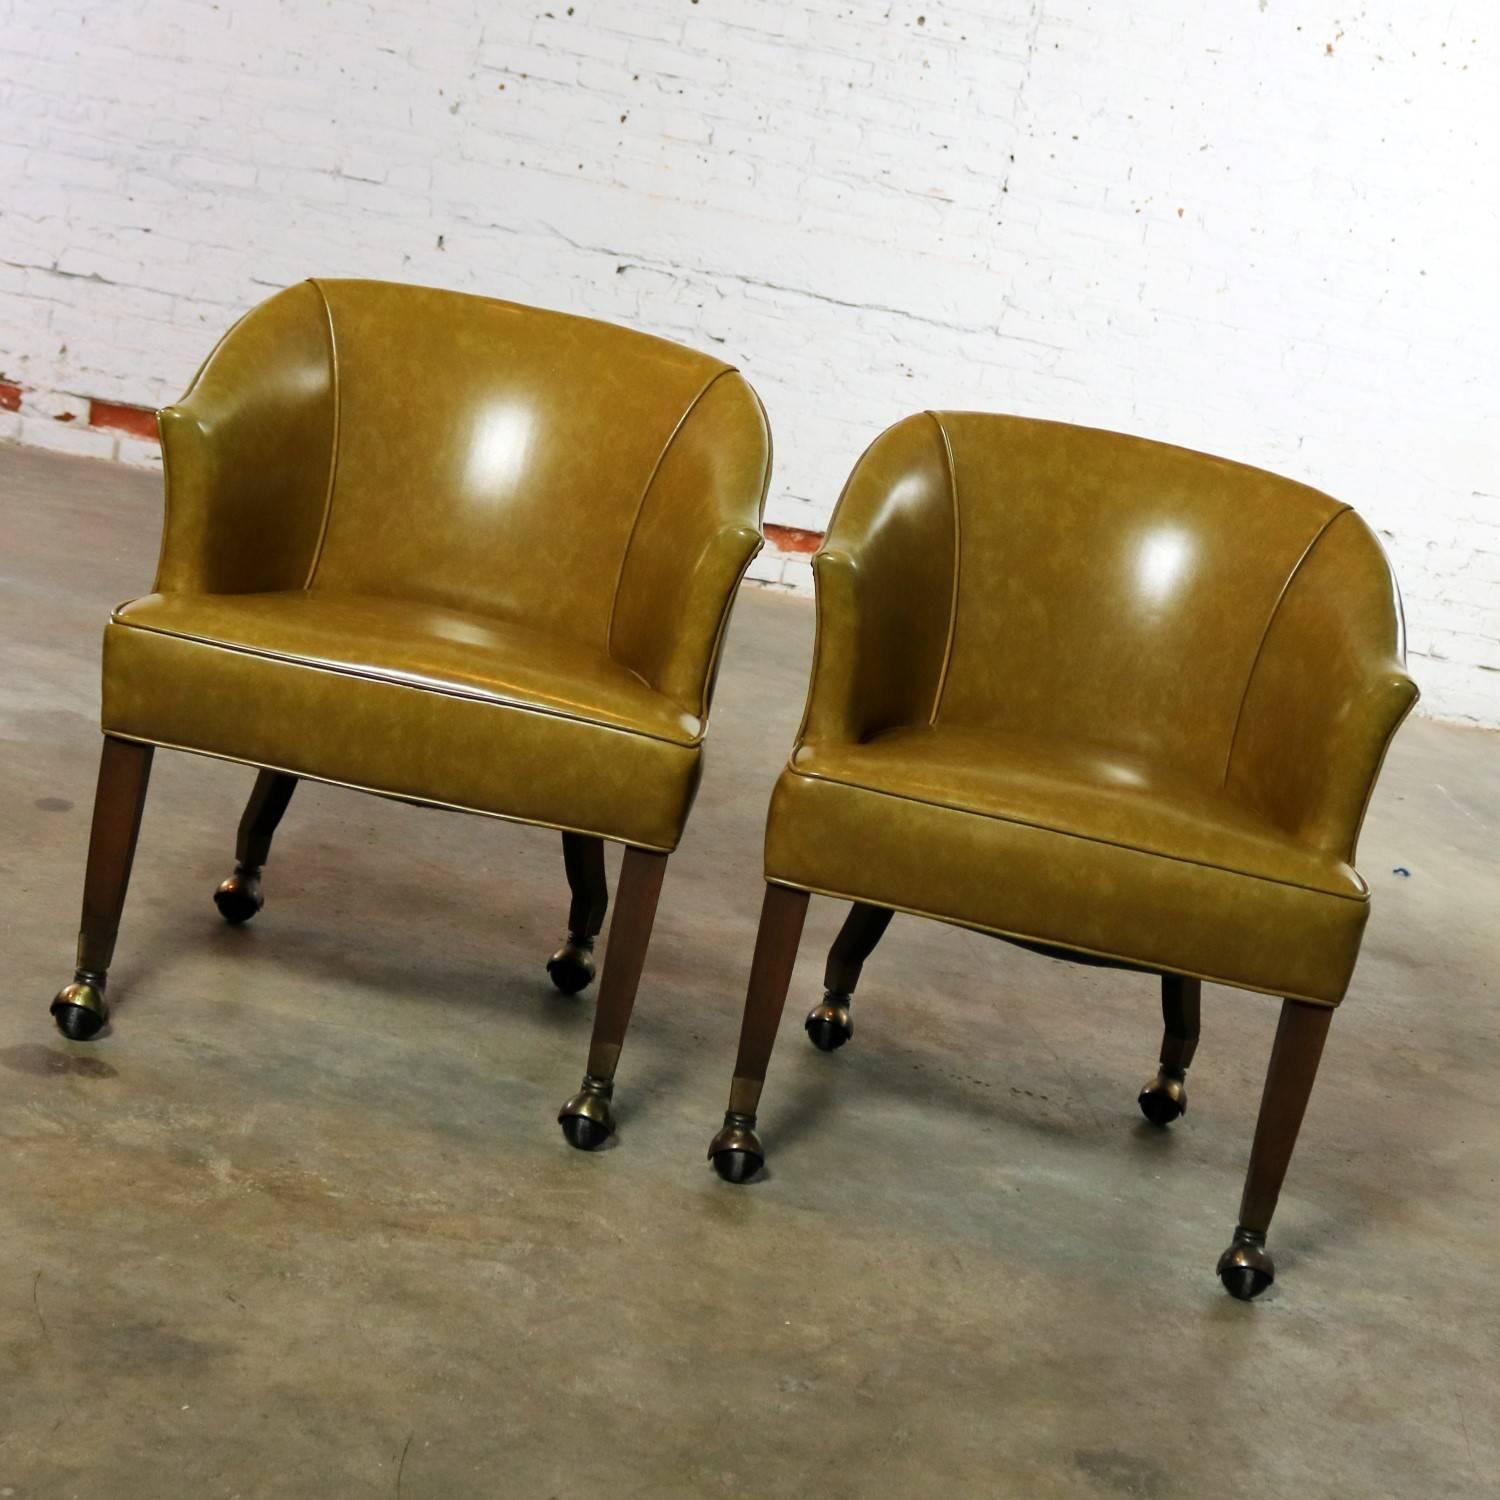 Hollywood Regency Pair of Midcentury Naugahyde Olive Green Rolling Barrel Chairs Nail Head Accent